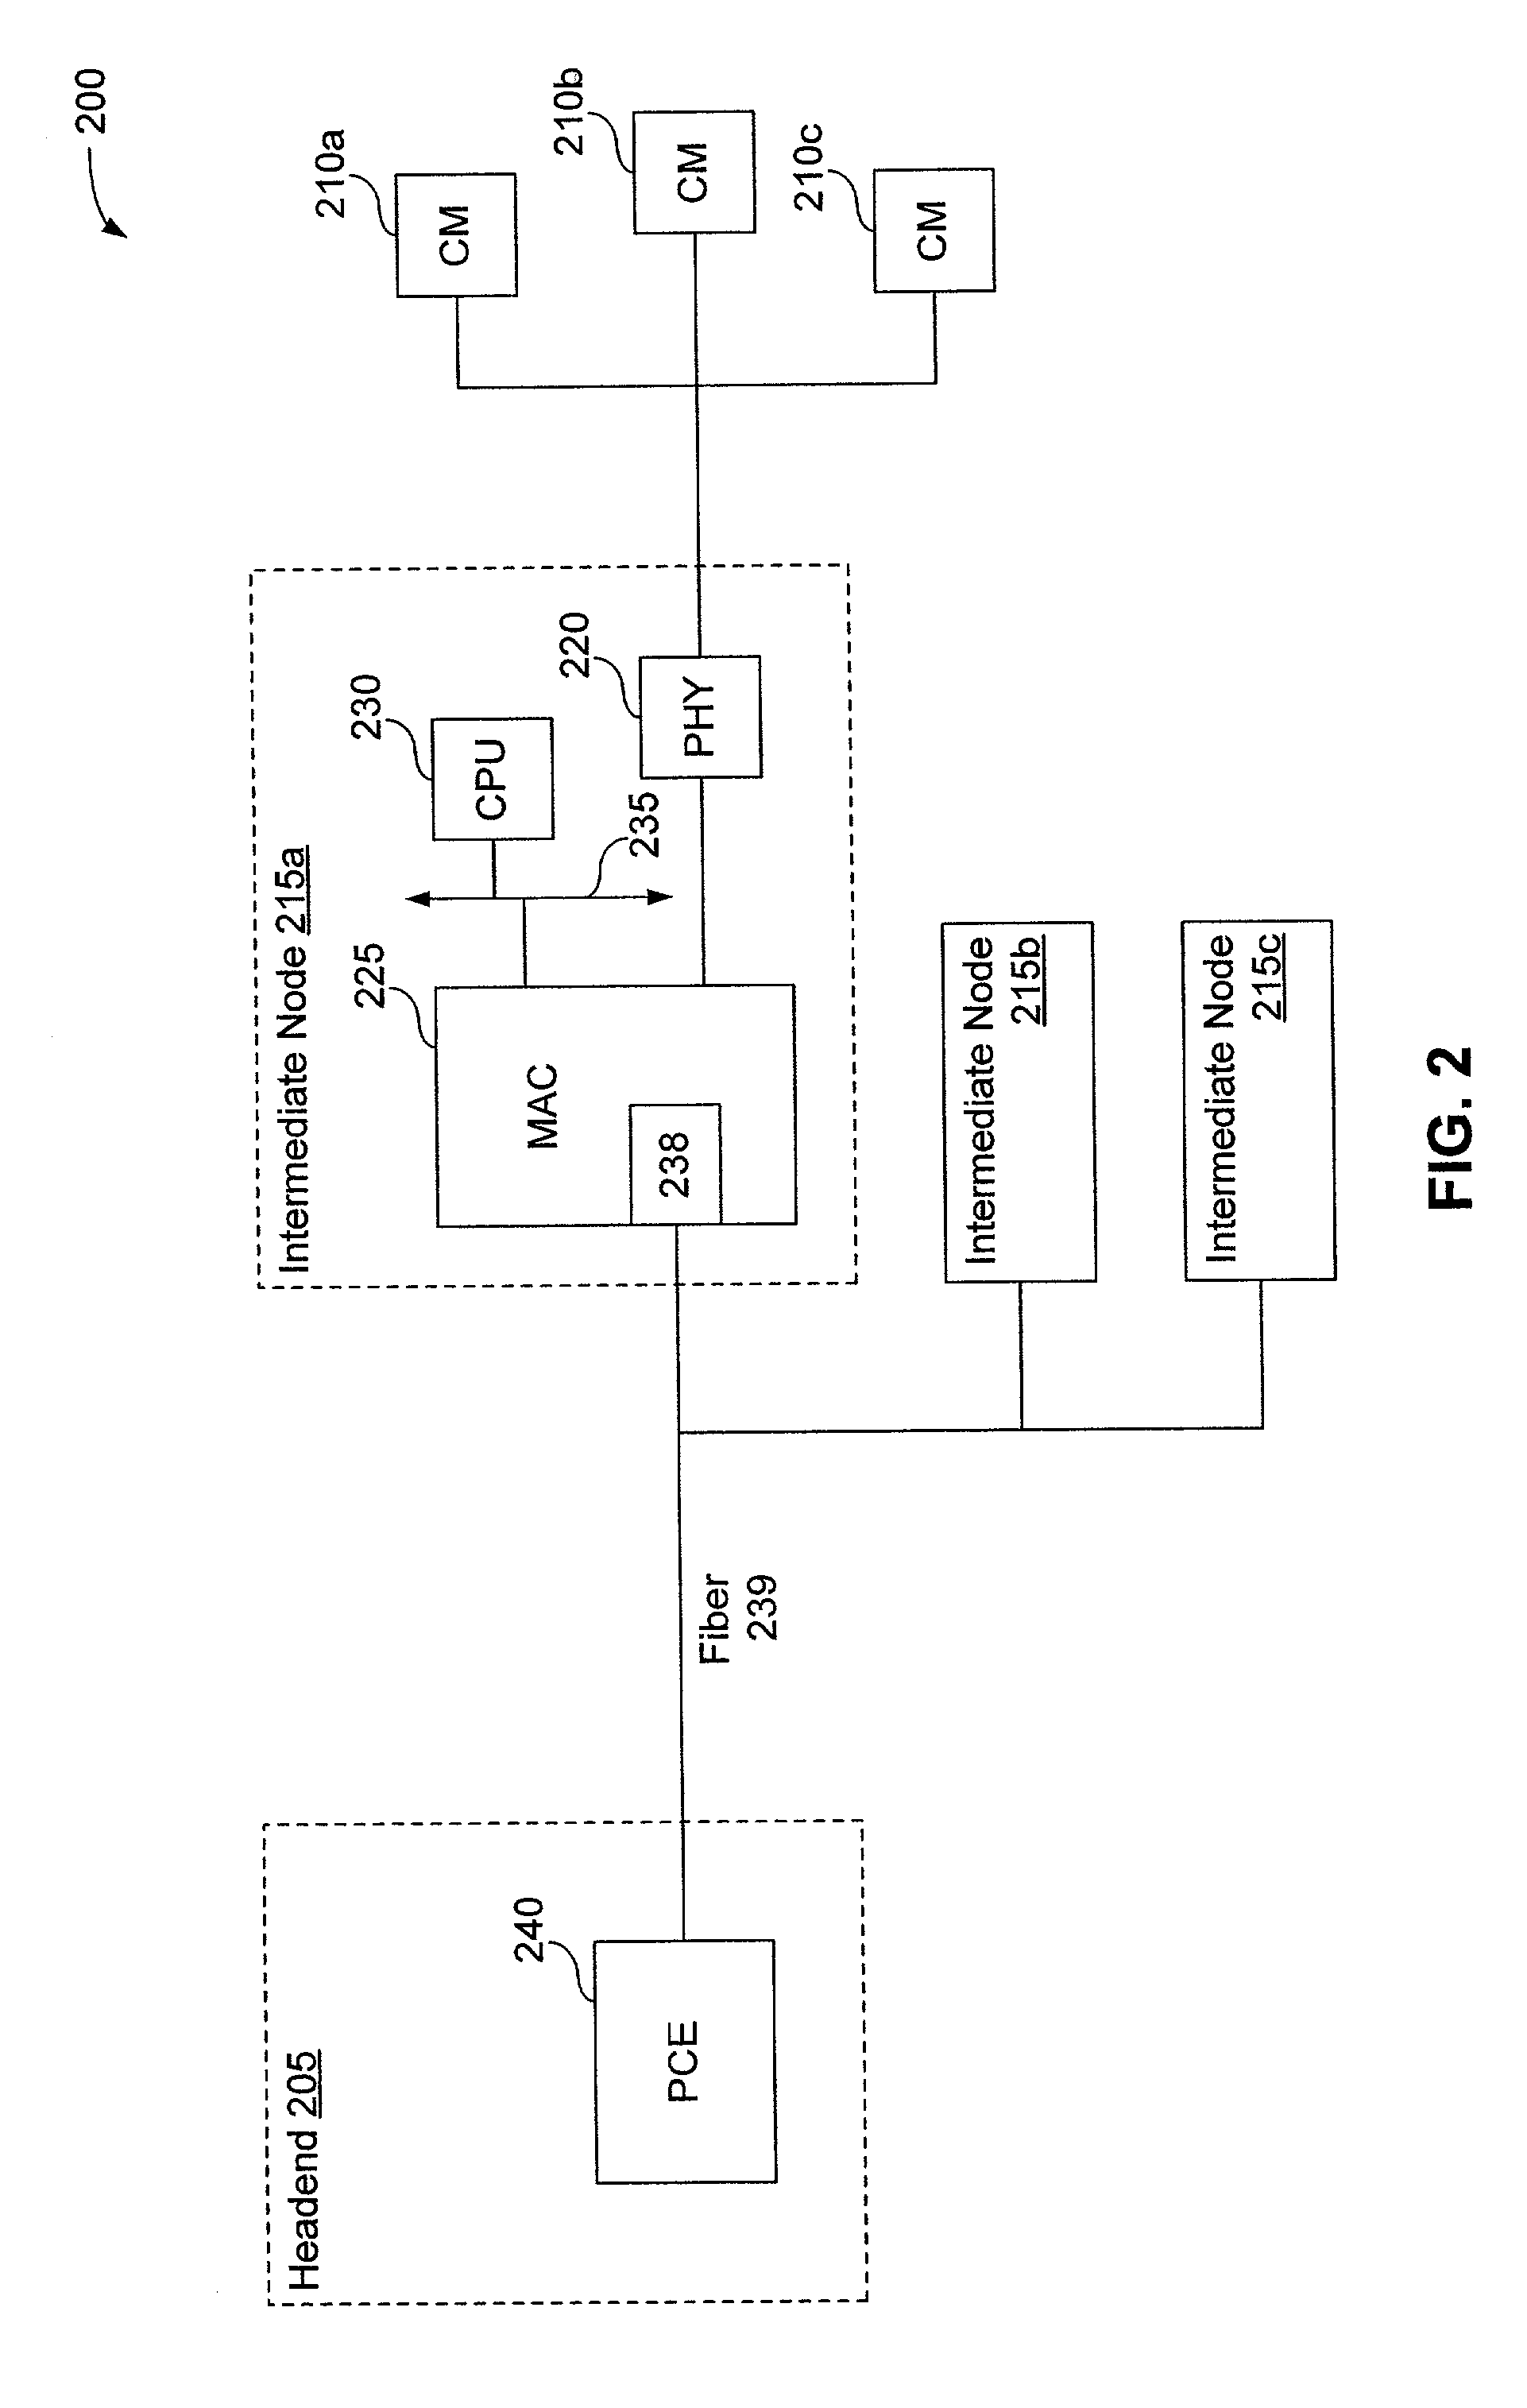 Packet tag for support of remote network function/packet classification